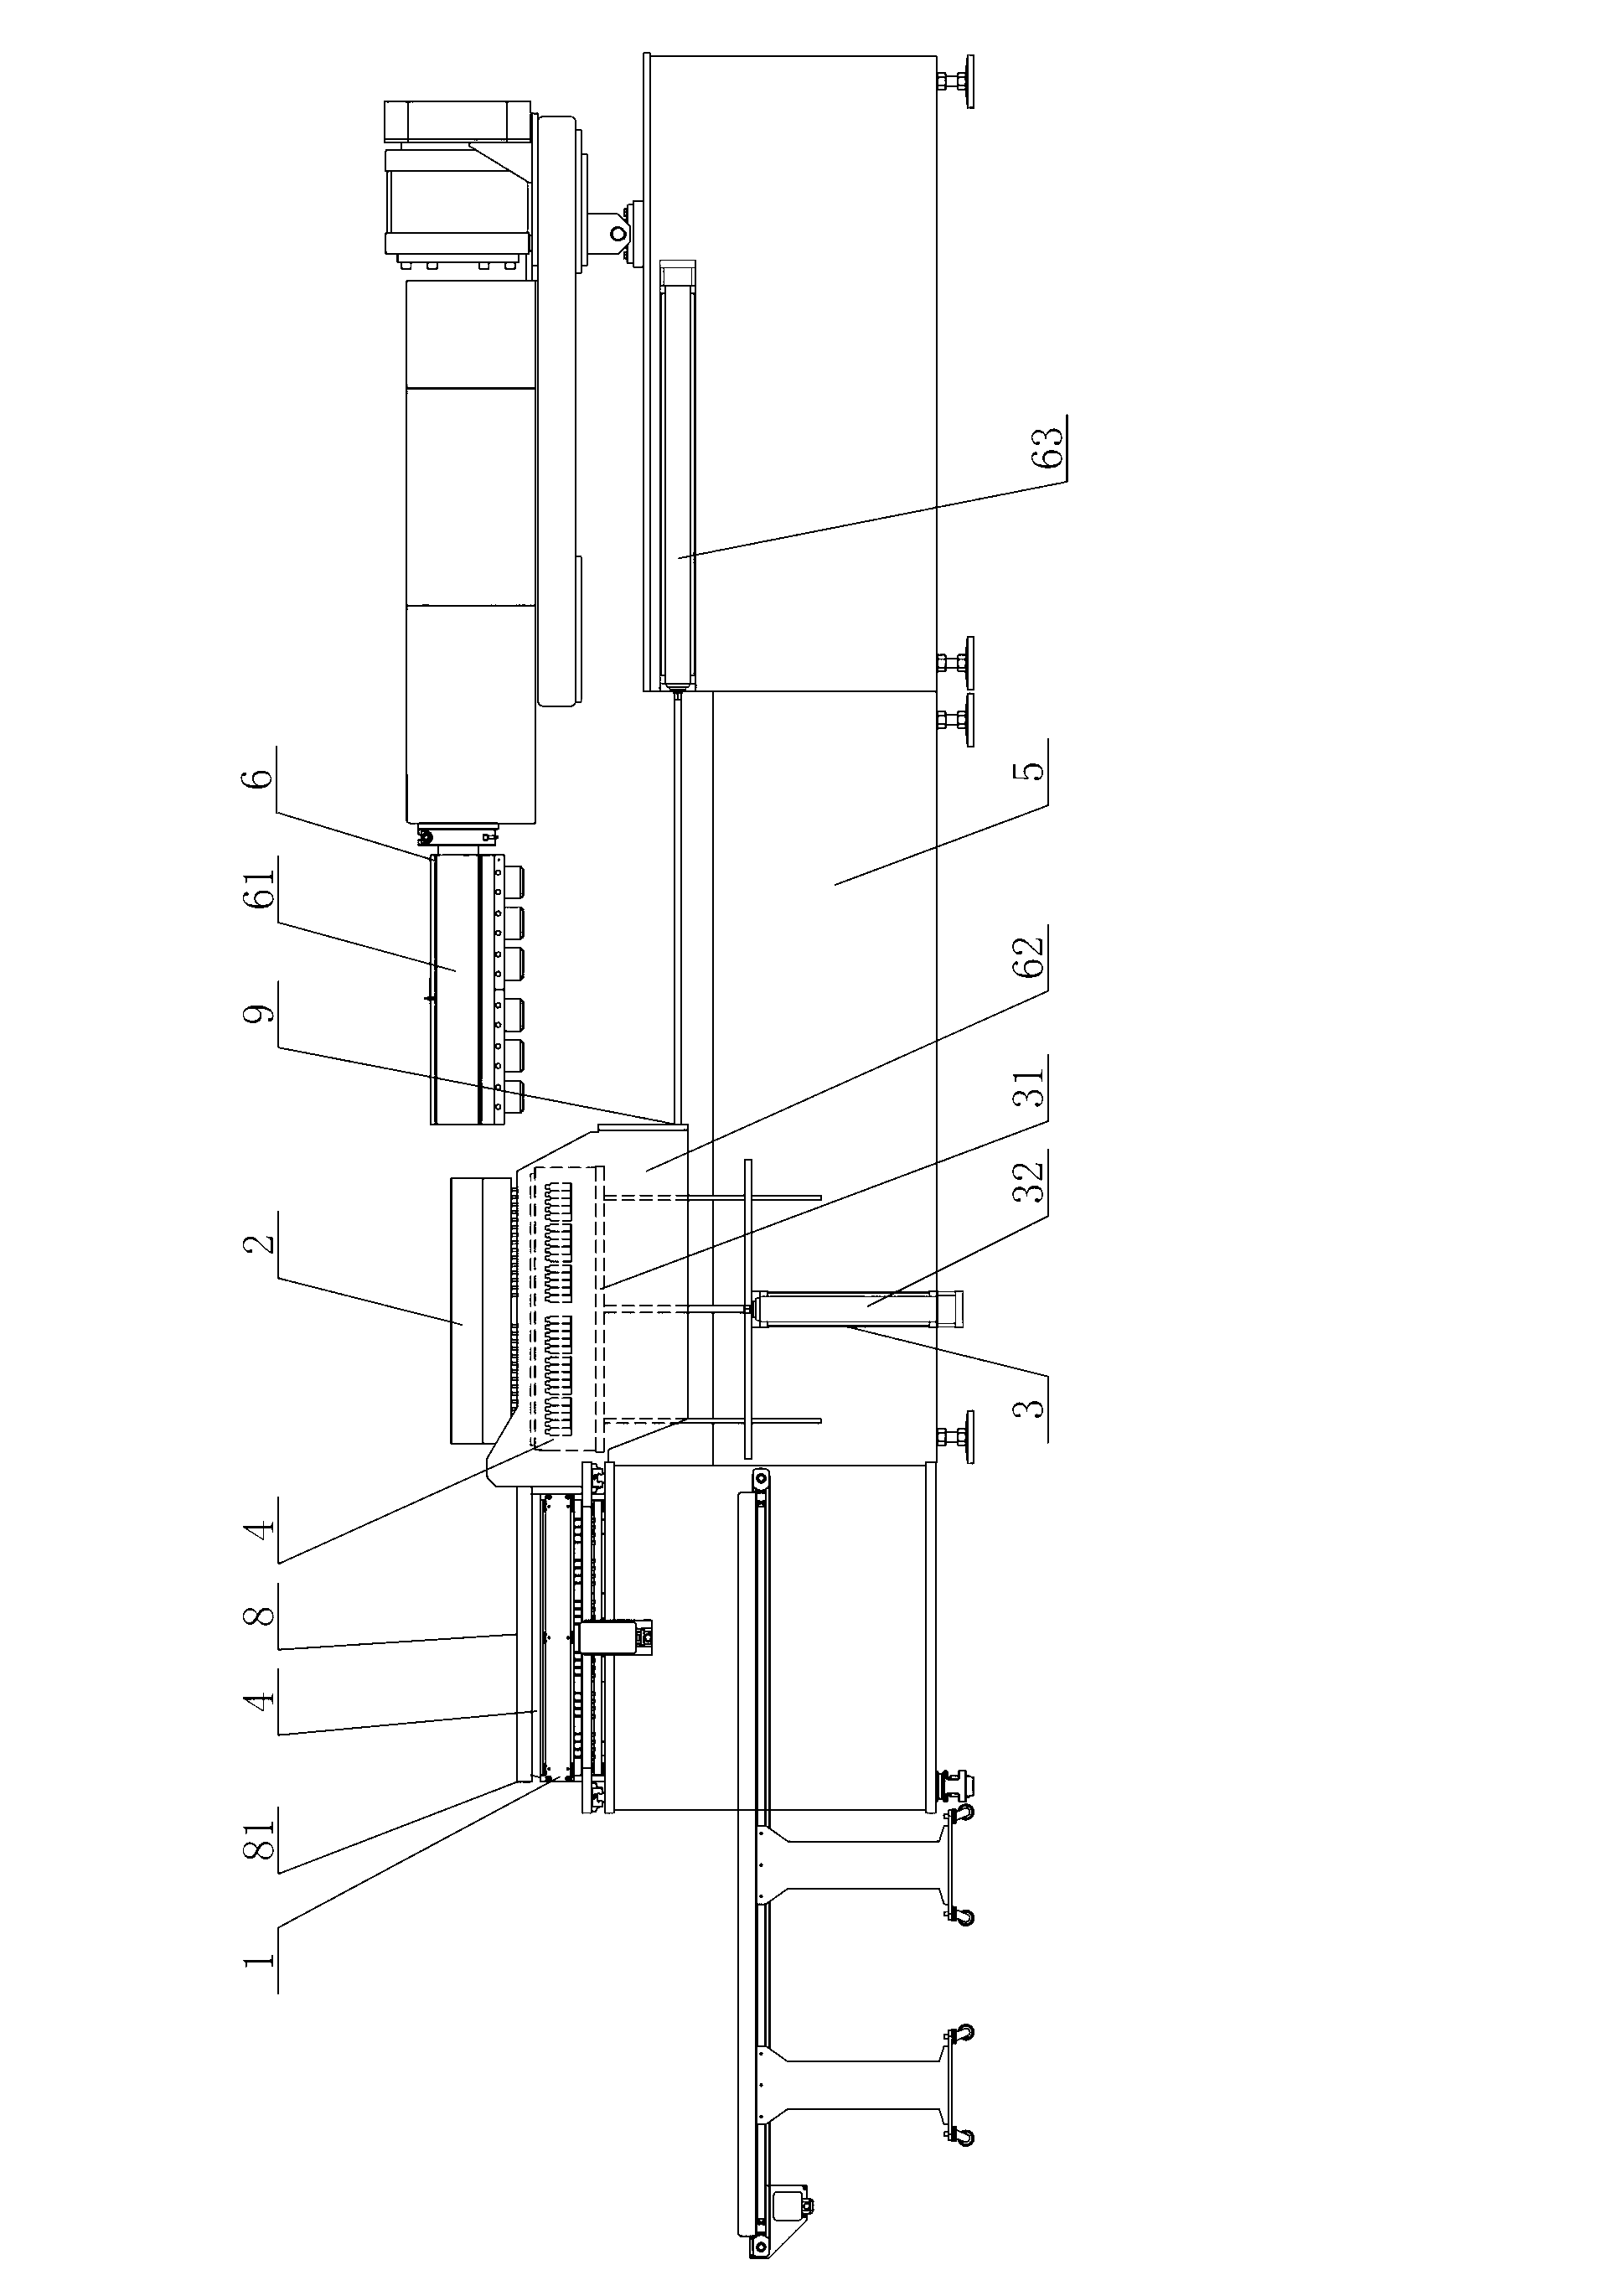 Blowing, filling and sealing integrated machine for plastic ampoule